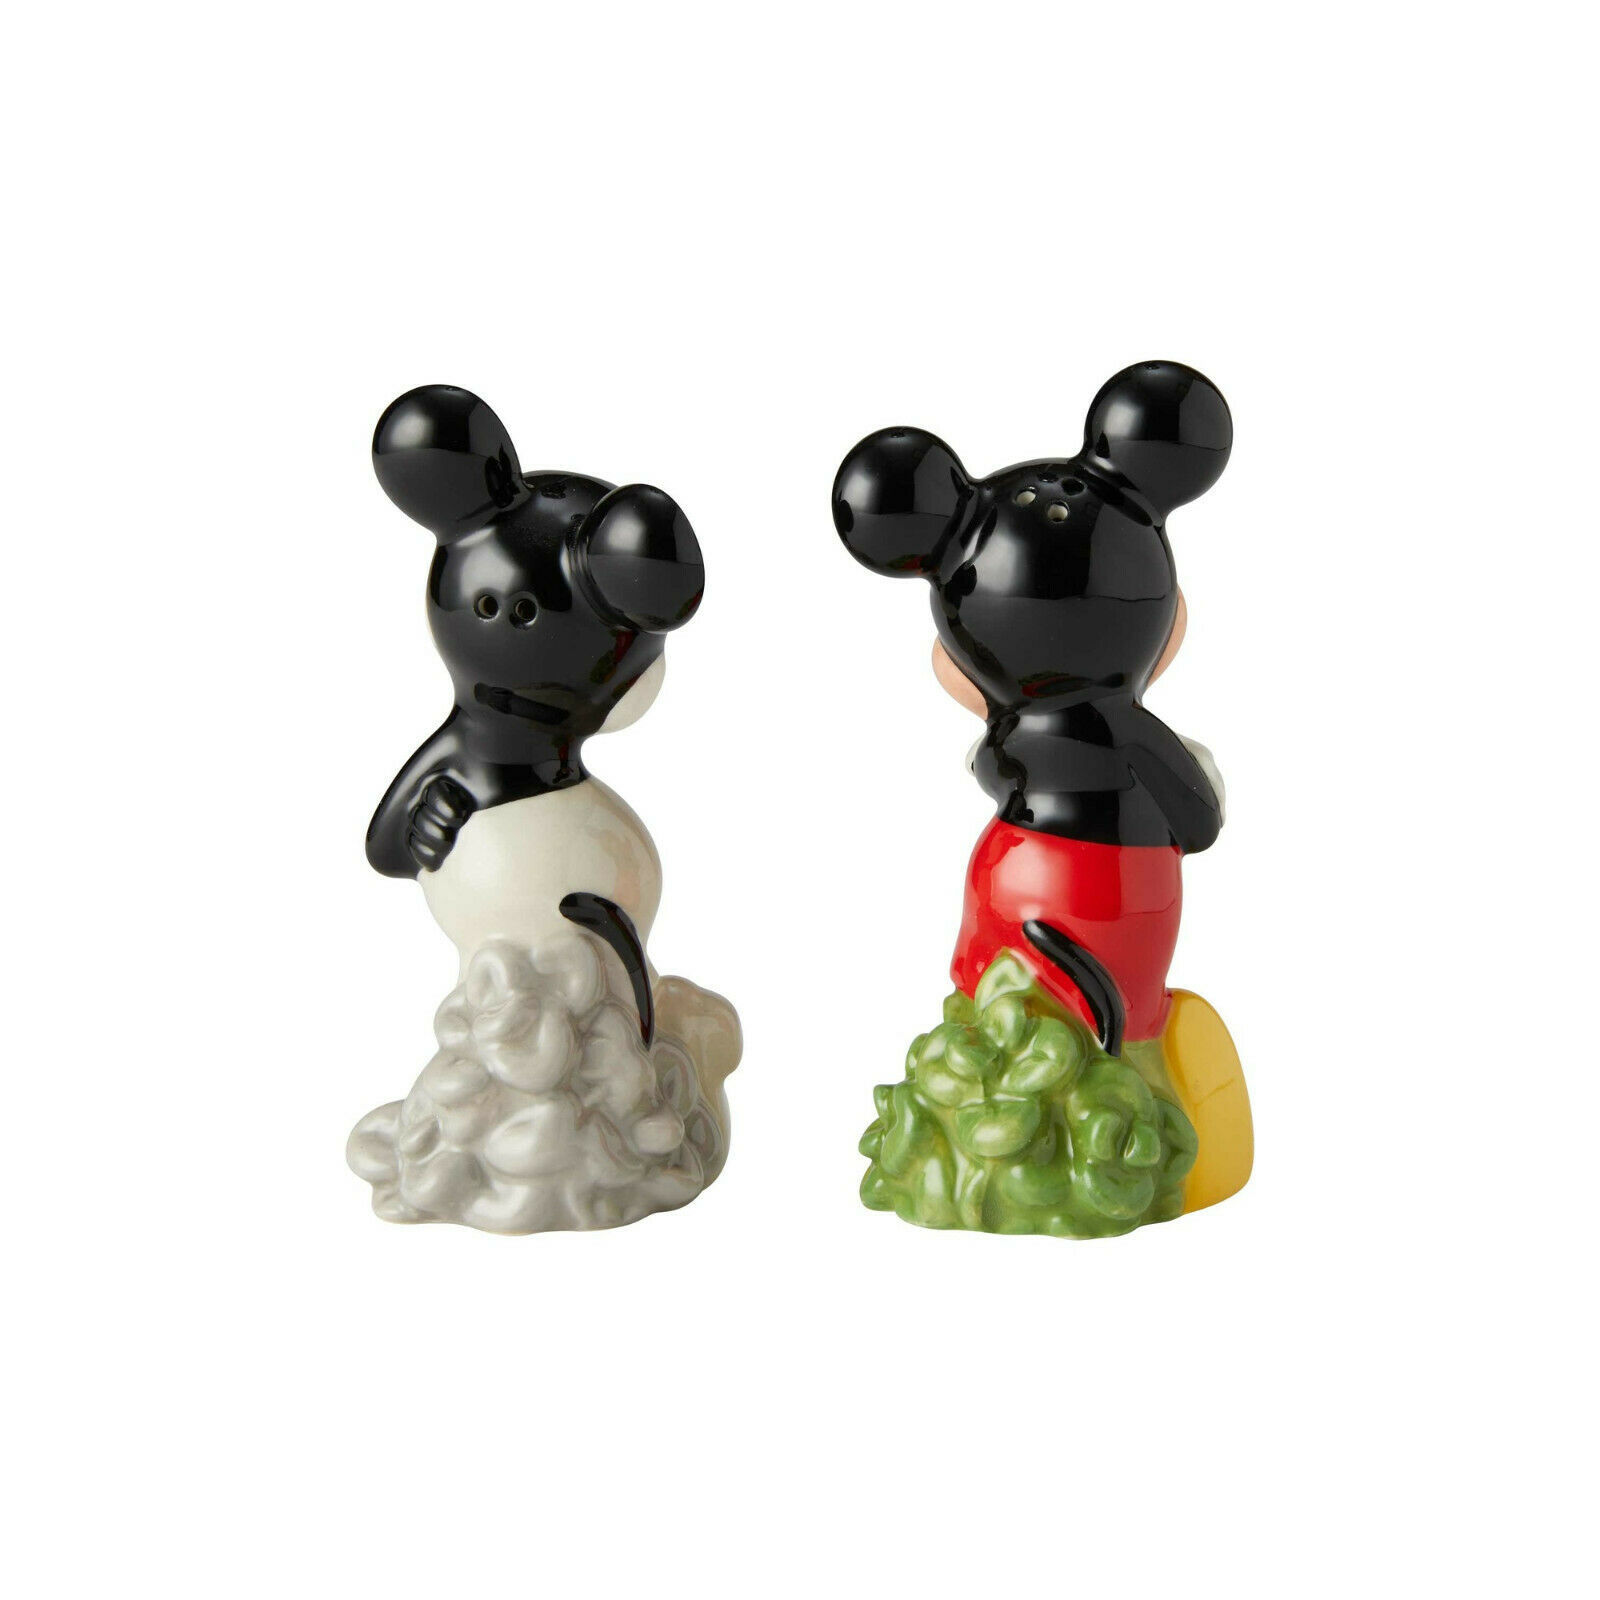 Mickey Mouse "Then and Now" Disney Design Salt & Pepper